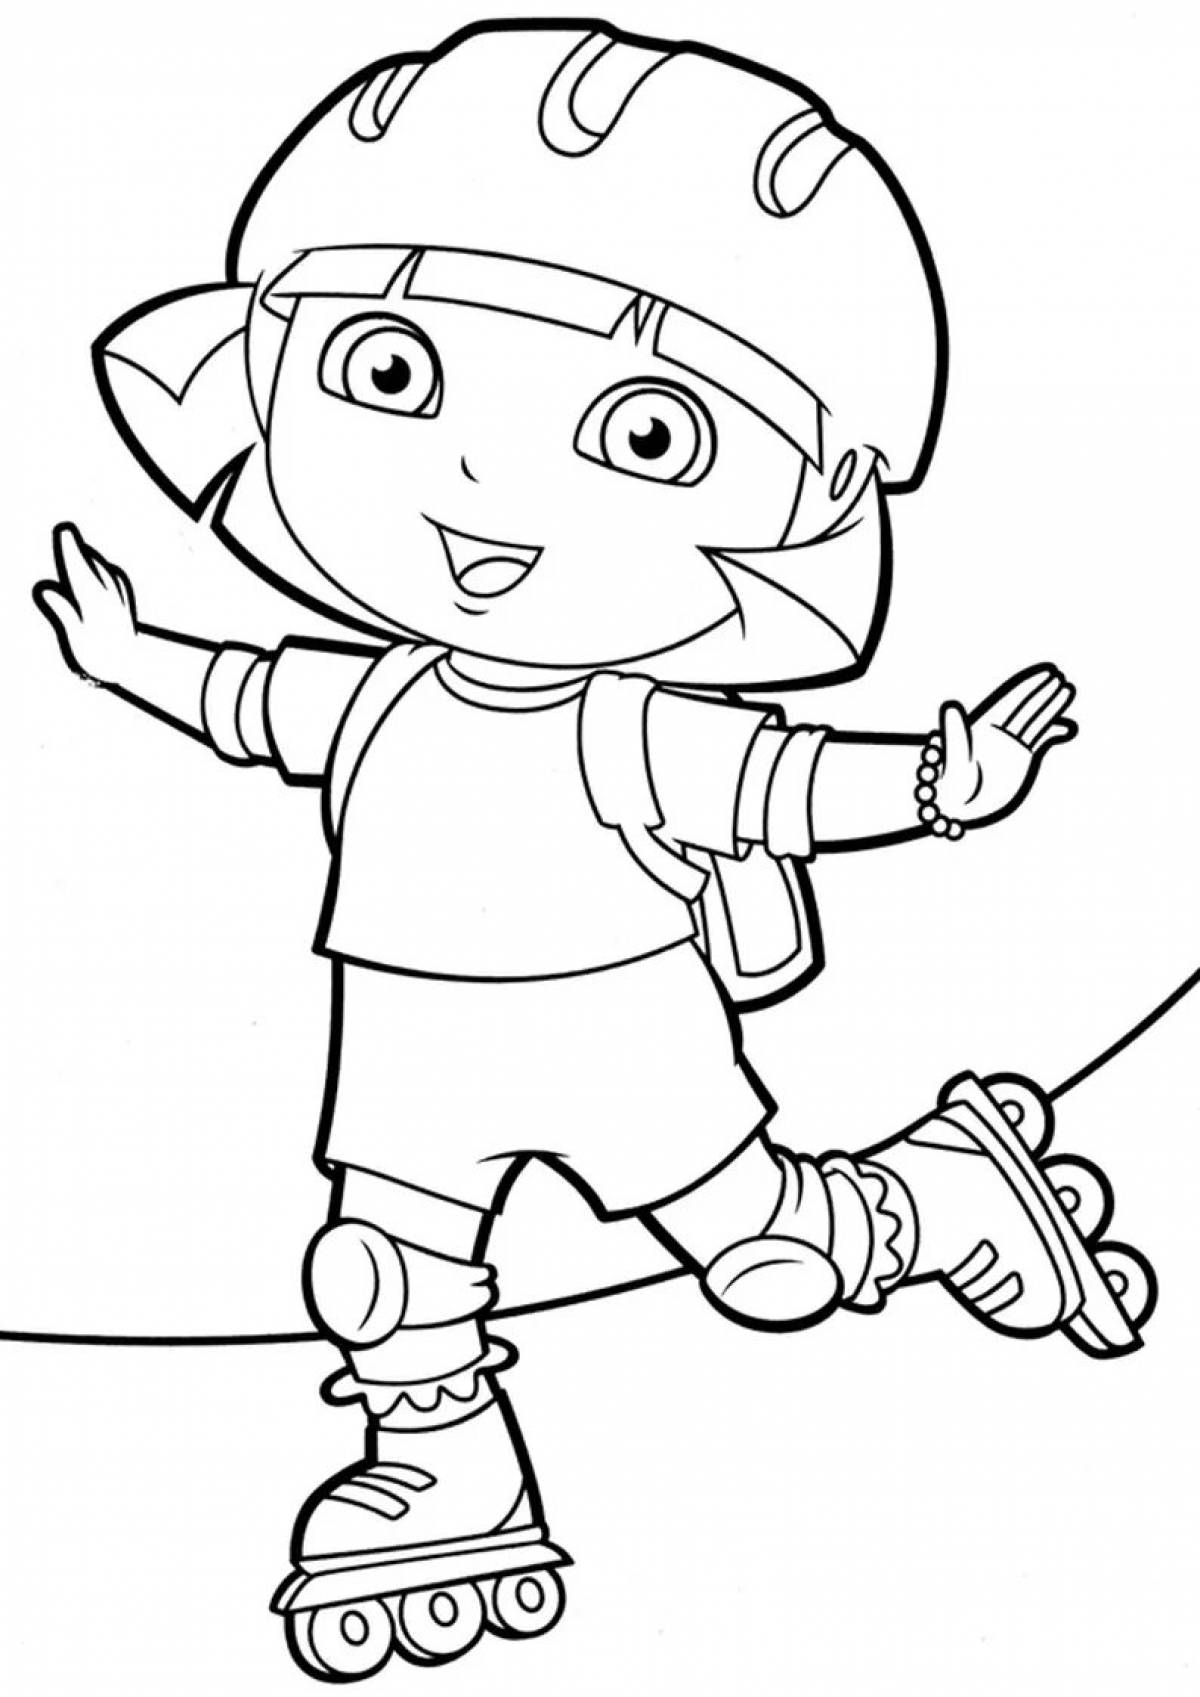 Glitter sports coloring book for 3-4 year olds